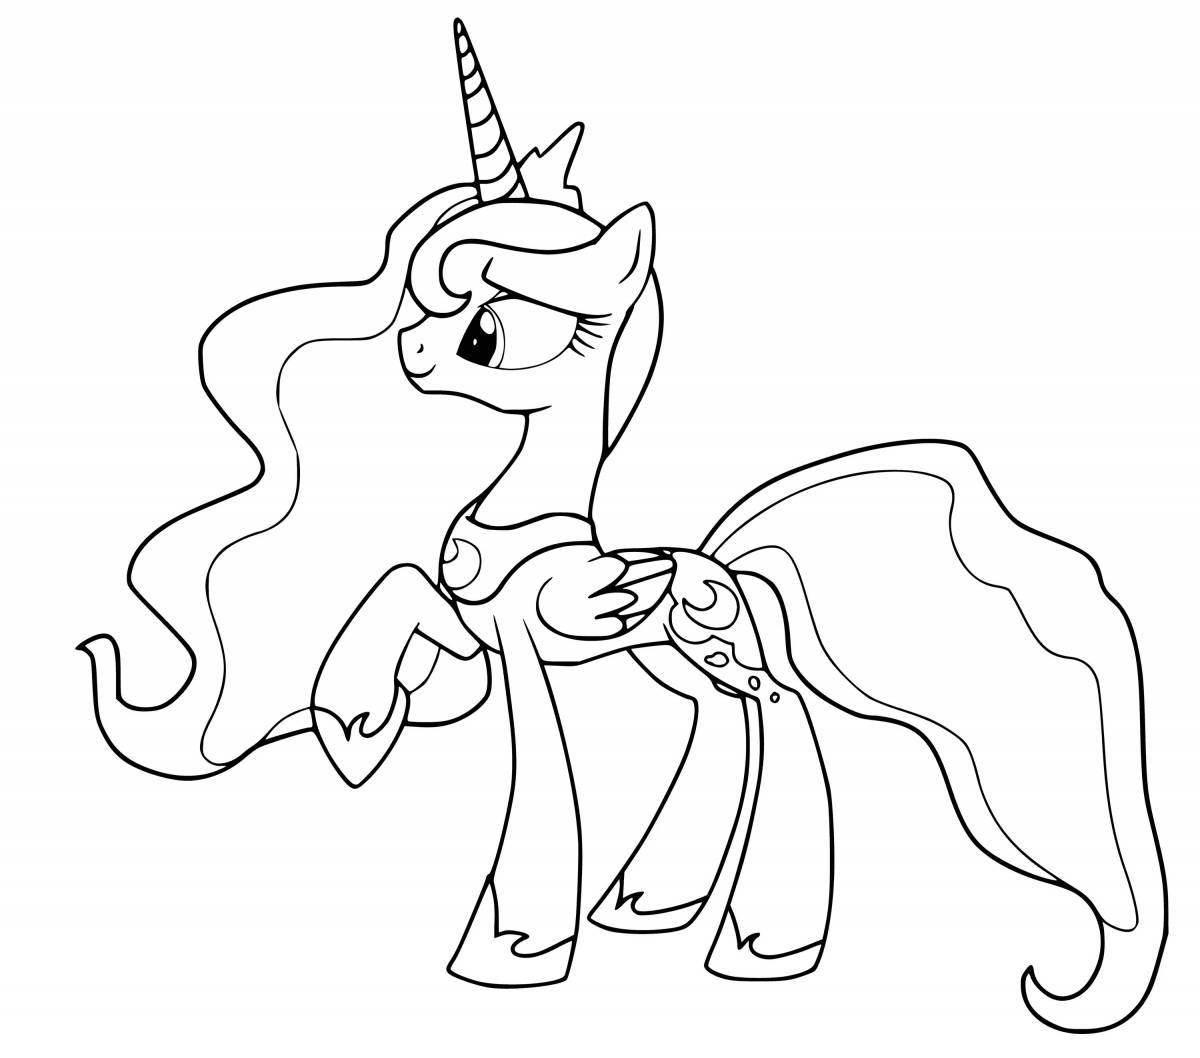 Radiant ponyville pony coloring page